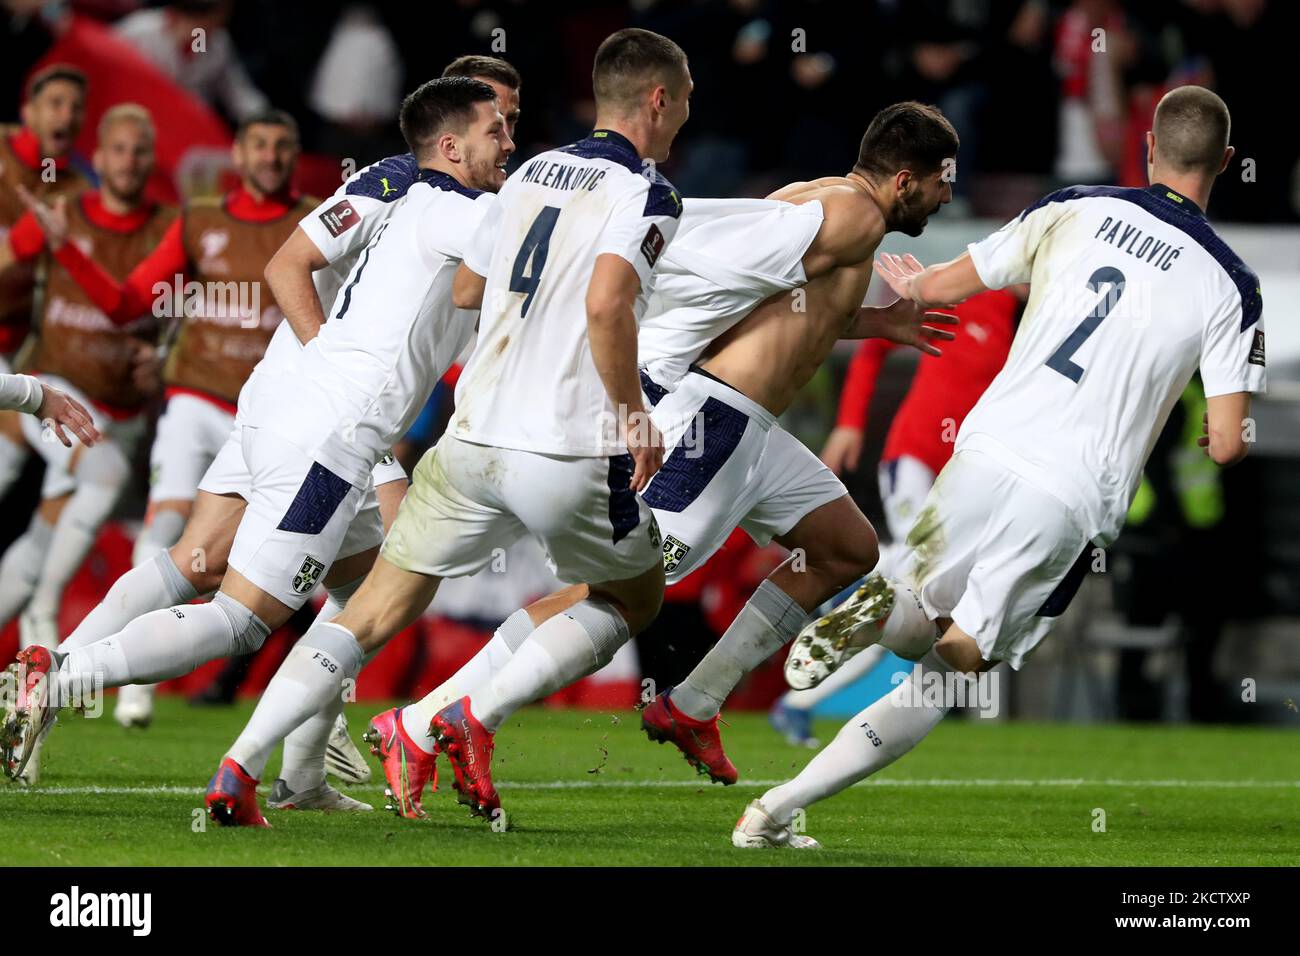 Serbia's forward Aleksandar Mitrovic celebrates after scoring a goal during the FIFA World Cup Qatar 2022 qualification group A football match between Portugal and Serbia at the Luz stadium in Lisbon, Portugal, on November 14, 2021. (Photo by Pedro FiÃºza/NurPhoto) Stock Photo